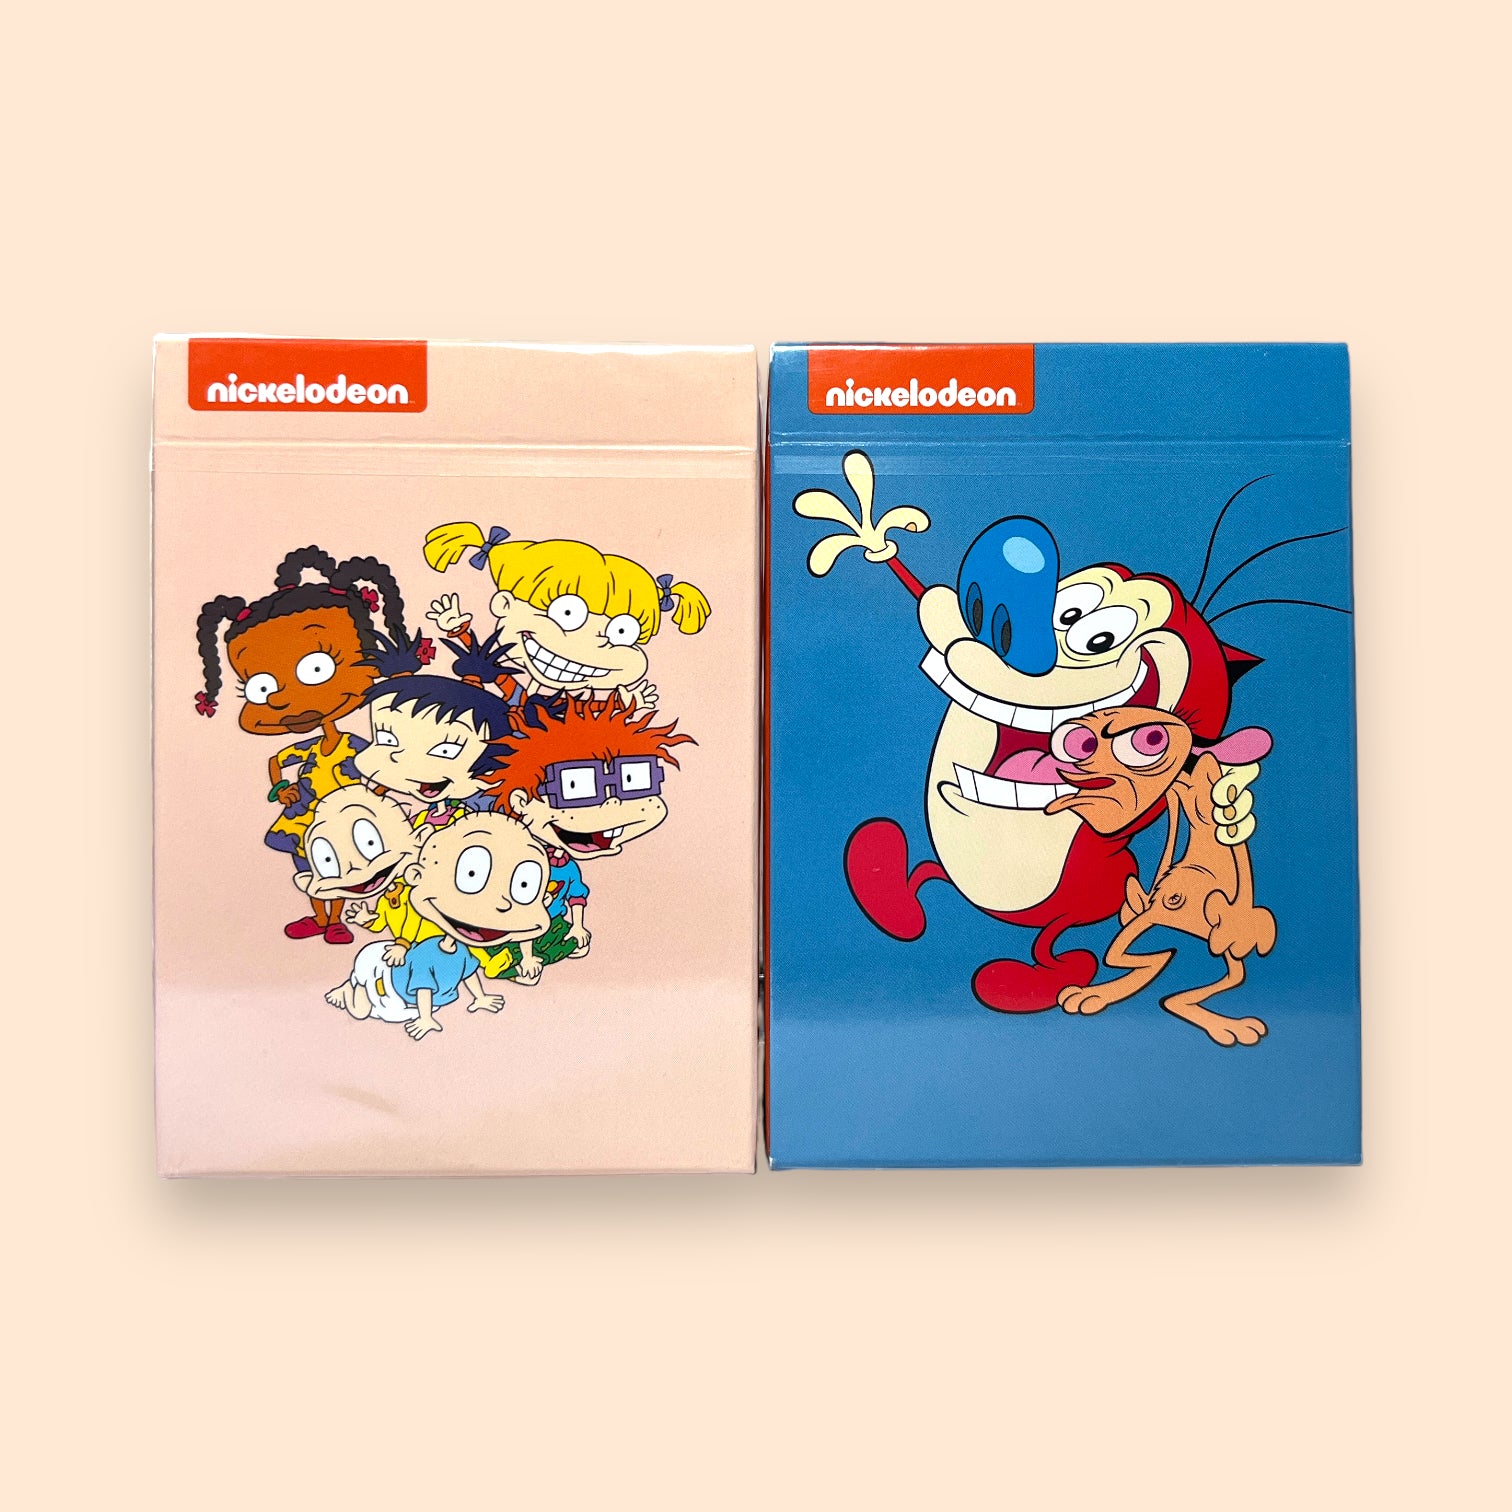 Fontaine Nickelodeon Ren &amp; Stimpy and Rugrats Gilded playing cards